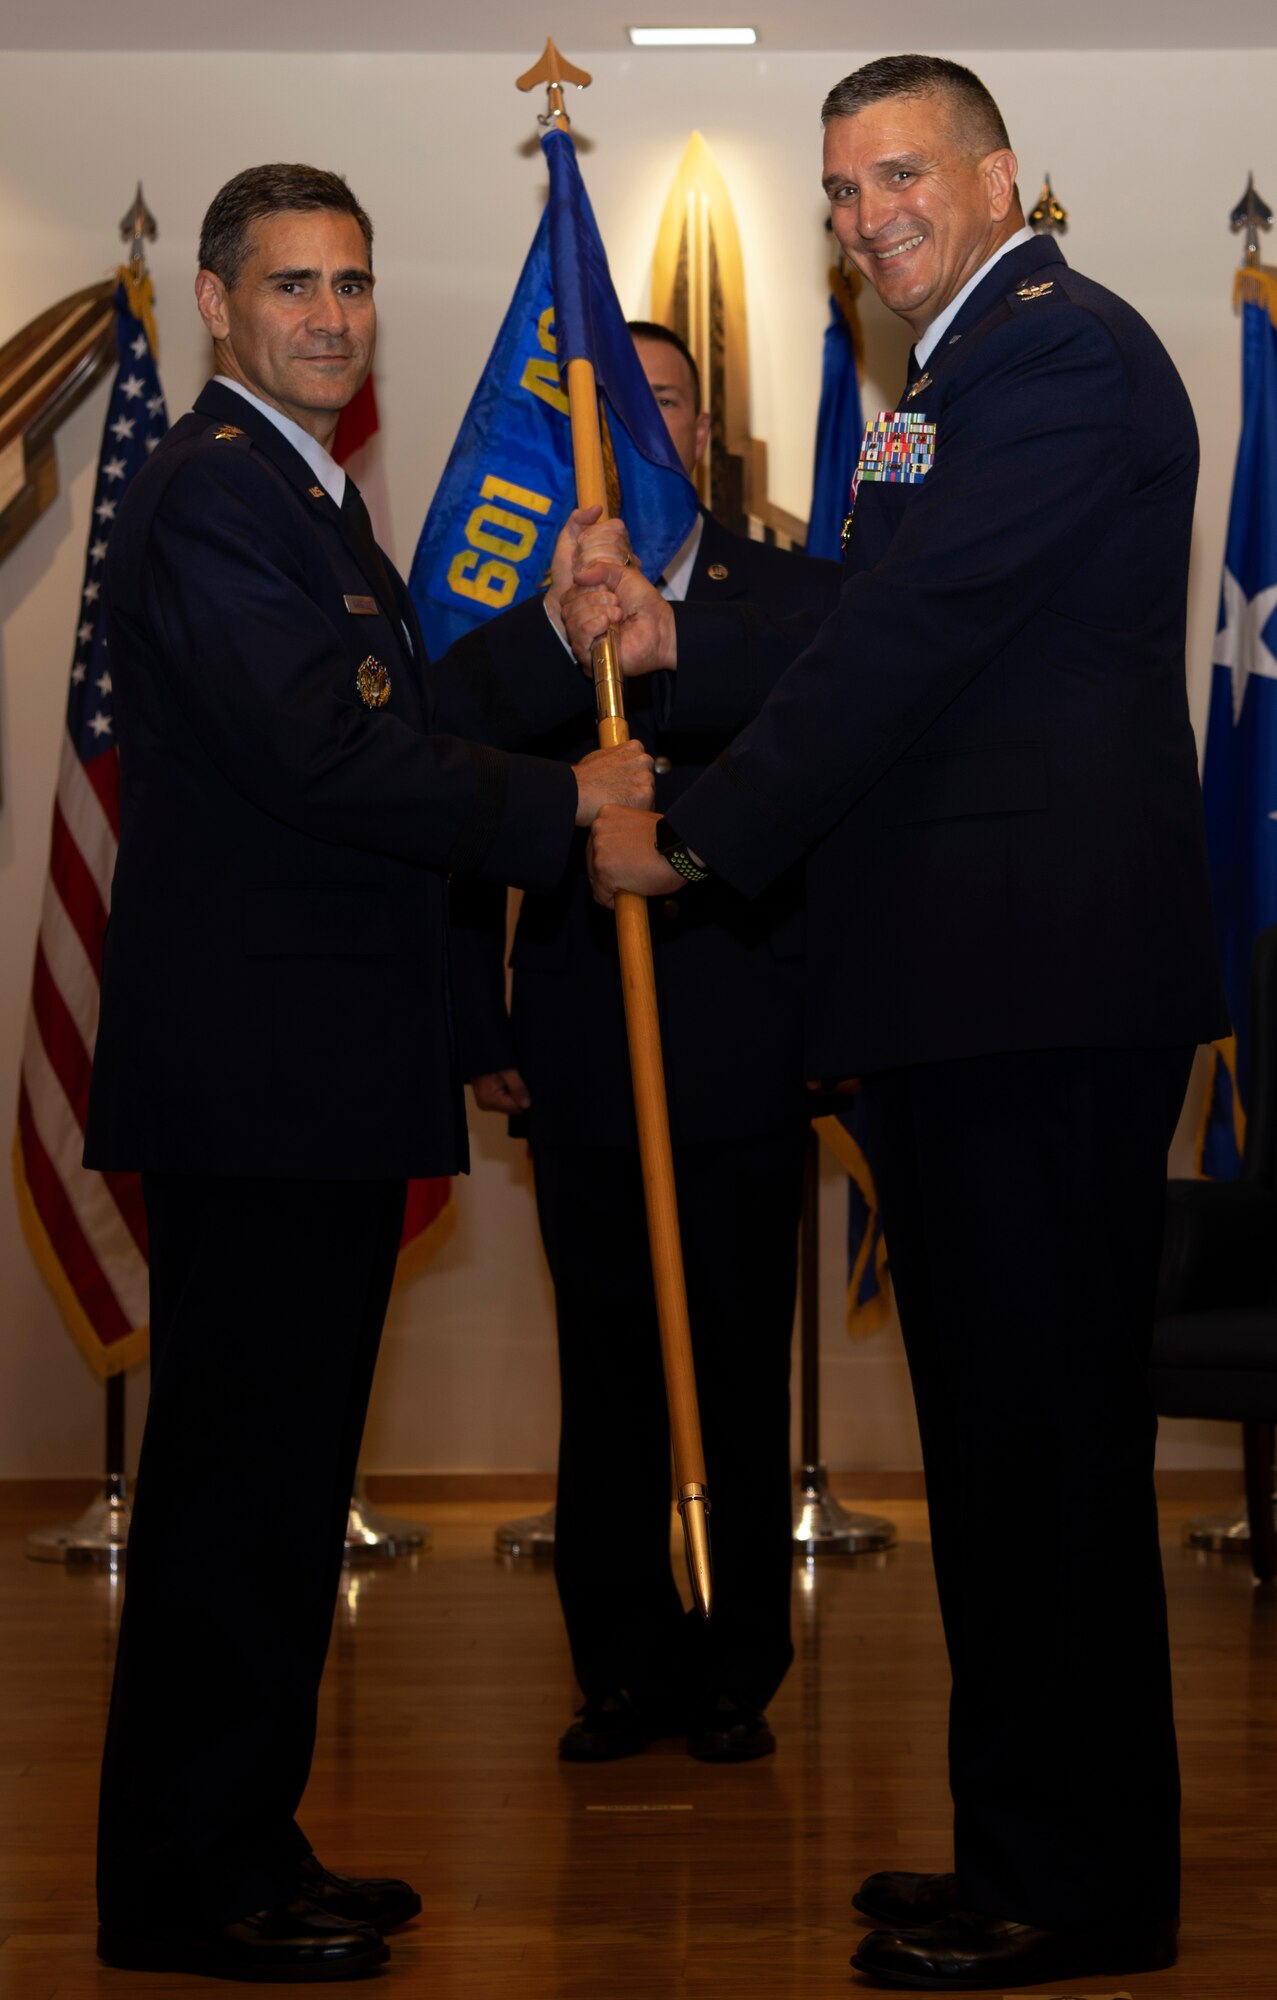 Col. Michael Valle, former 601st Air Operations Center commander, passes the ceremonial flag to Lt. Gen. Marc Sasseville, Continental U.S. North American Aerospace Defense Command Region - First Air Force (Air Forces Northern) commander, during the 601st Air Operations Center change of command ceremony at Tyndall Air Force Base, Florida on Sept. 26, 2019. The passing of the flag symbolizes Valle's passing of command to Col. Greg Krane, the new commander of the 601st AOC. (U.S. Air Force photo by Senior Airman Cheyenne Larkin)